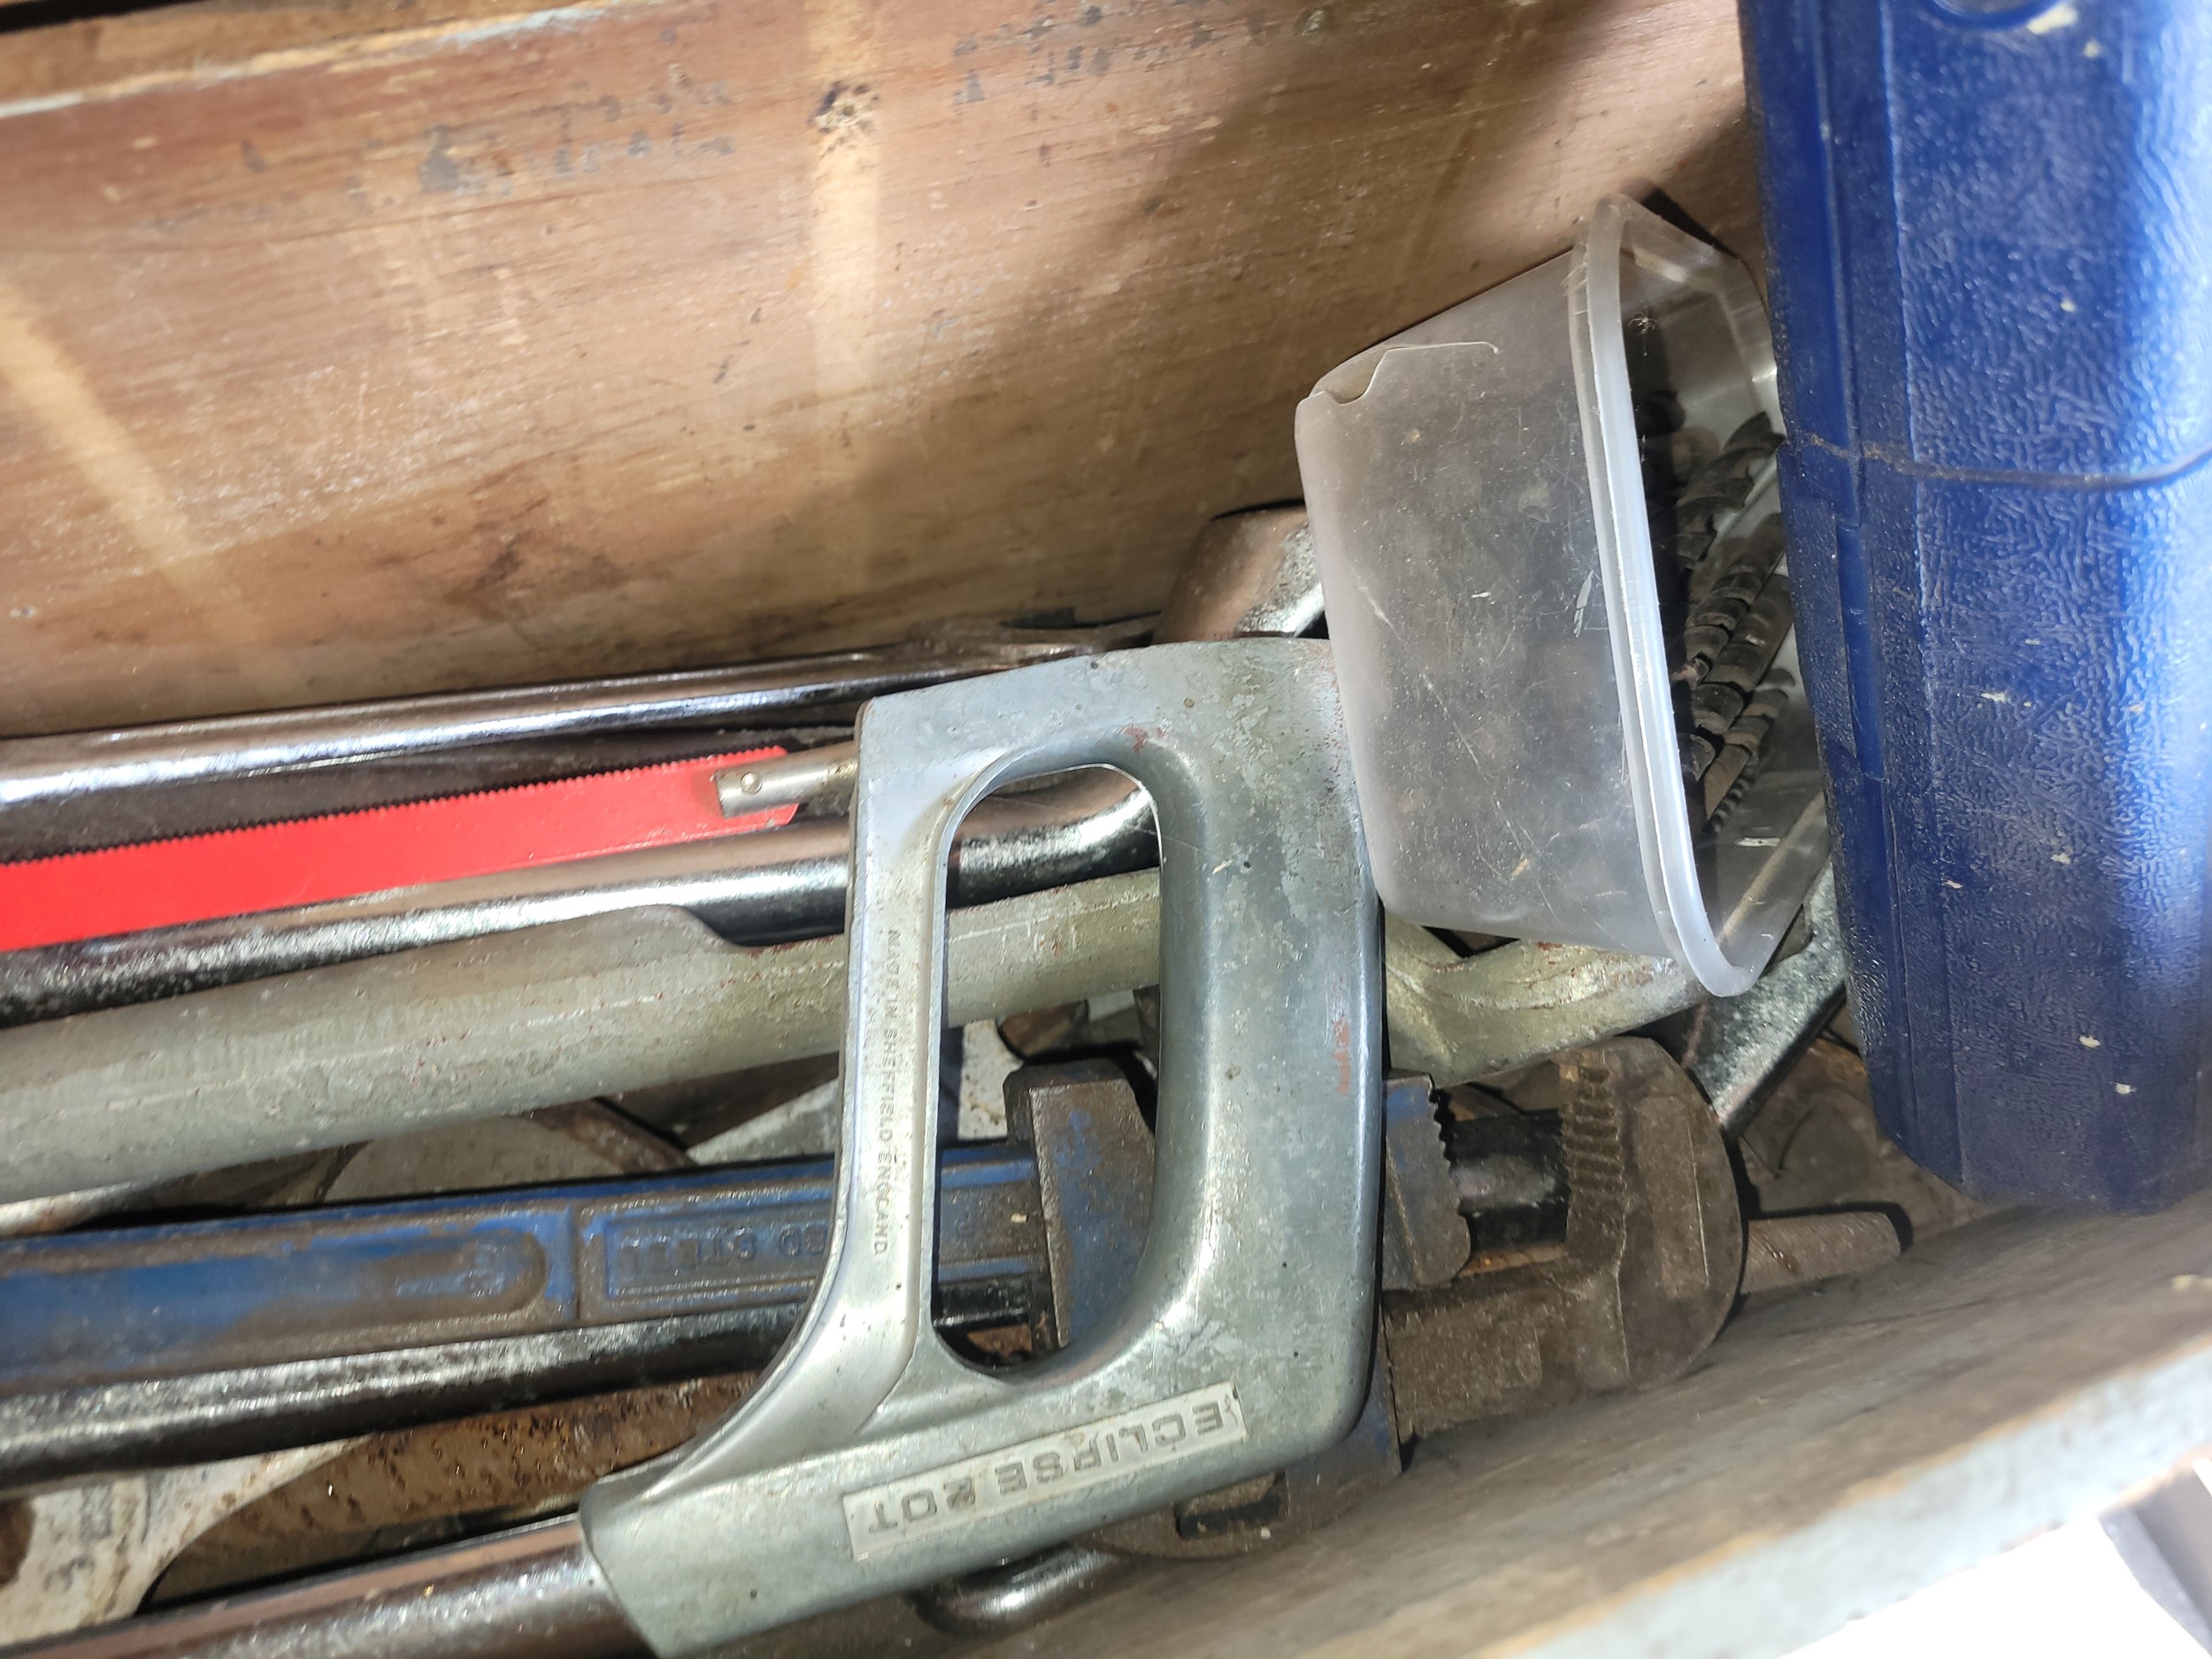 Two carpenters tool chests and contents, to include spanners, saws, planes, drill bits, socket - Image 6 of 6